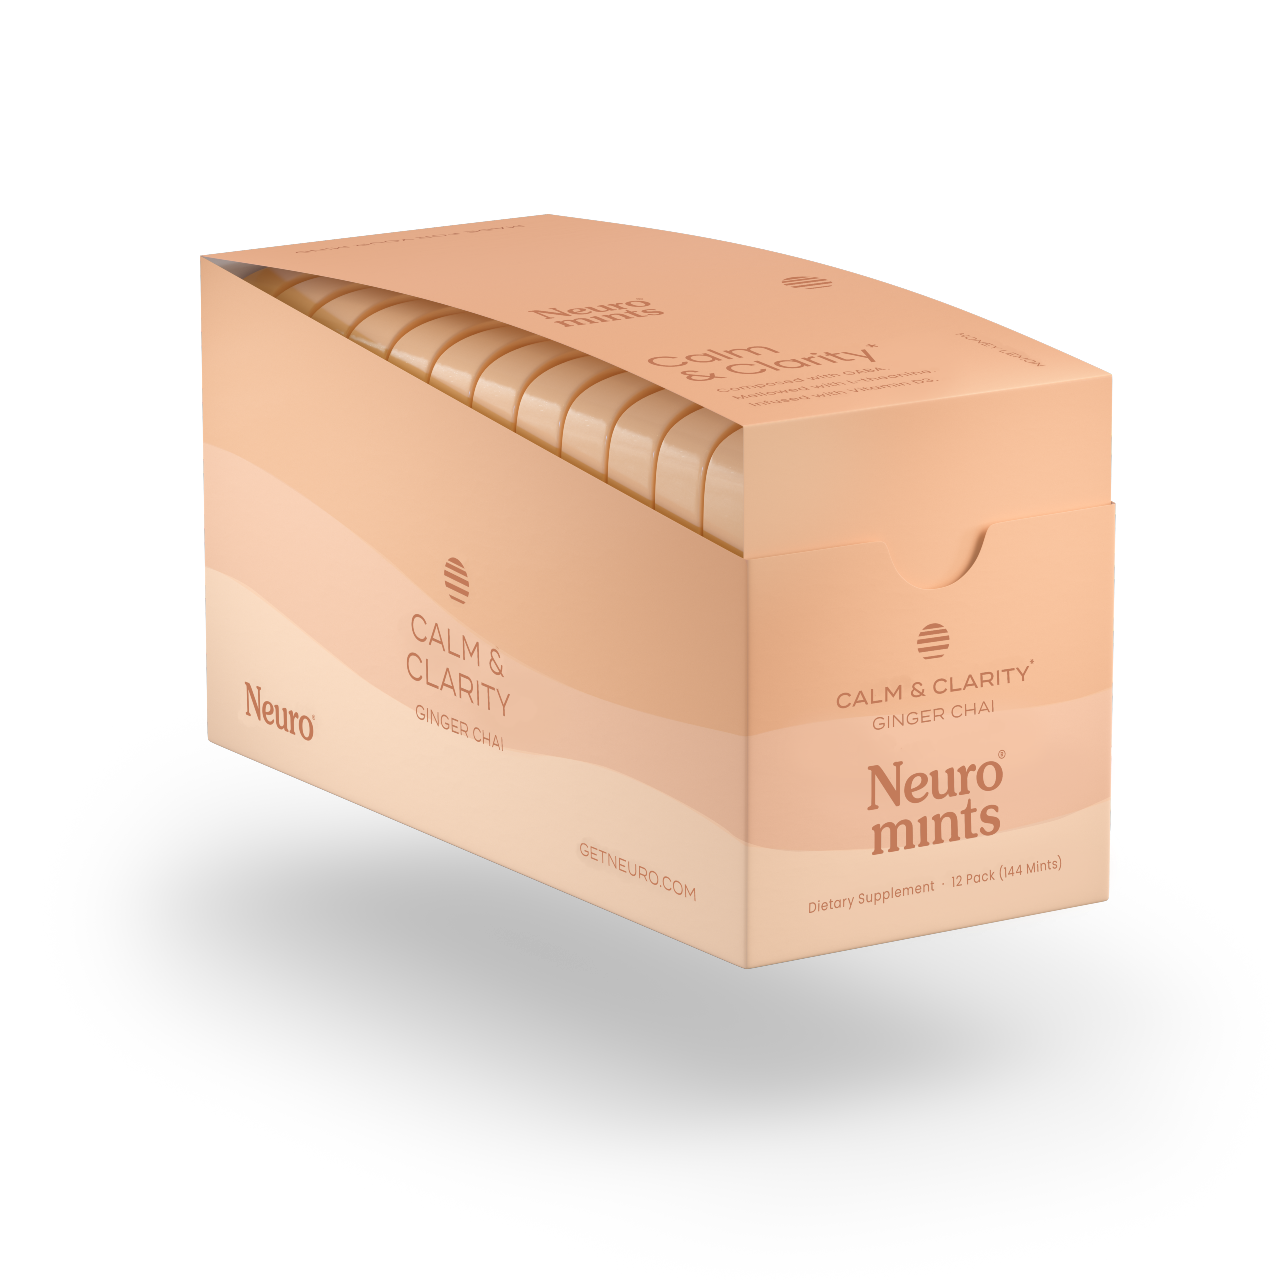 Neuro Mints | GABA + L-theanine + Vitamin D3 | Calm and Clarity Mints by Neuro